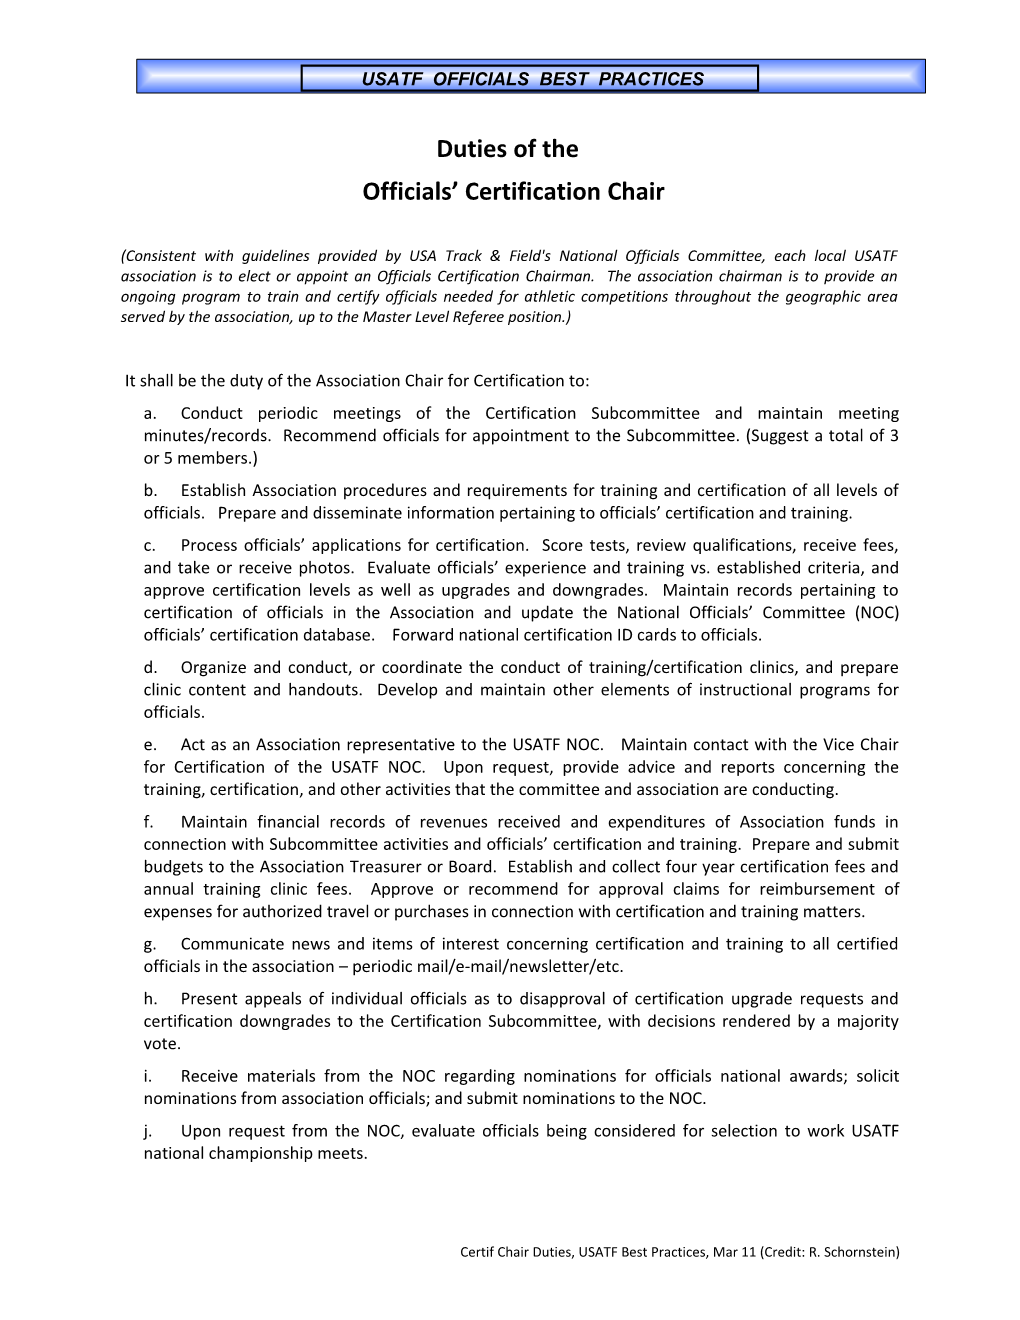 It Shall Be the Duty of the Association Chair for Certification To